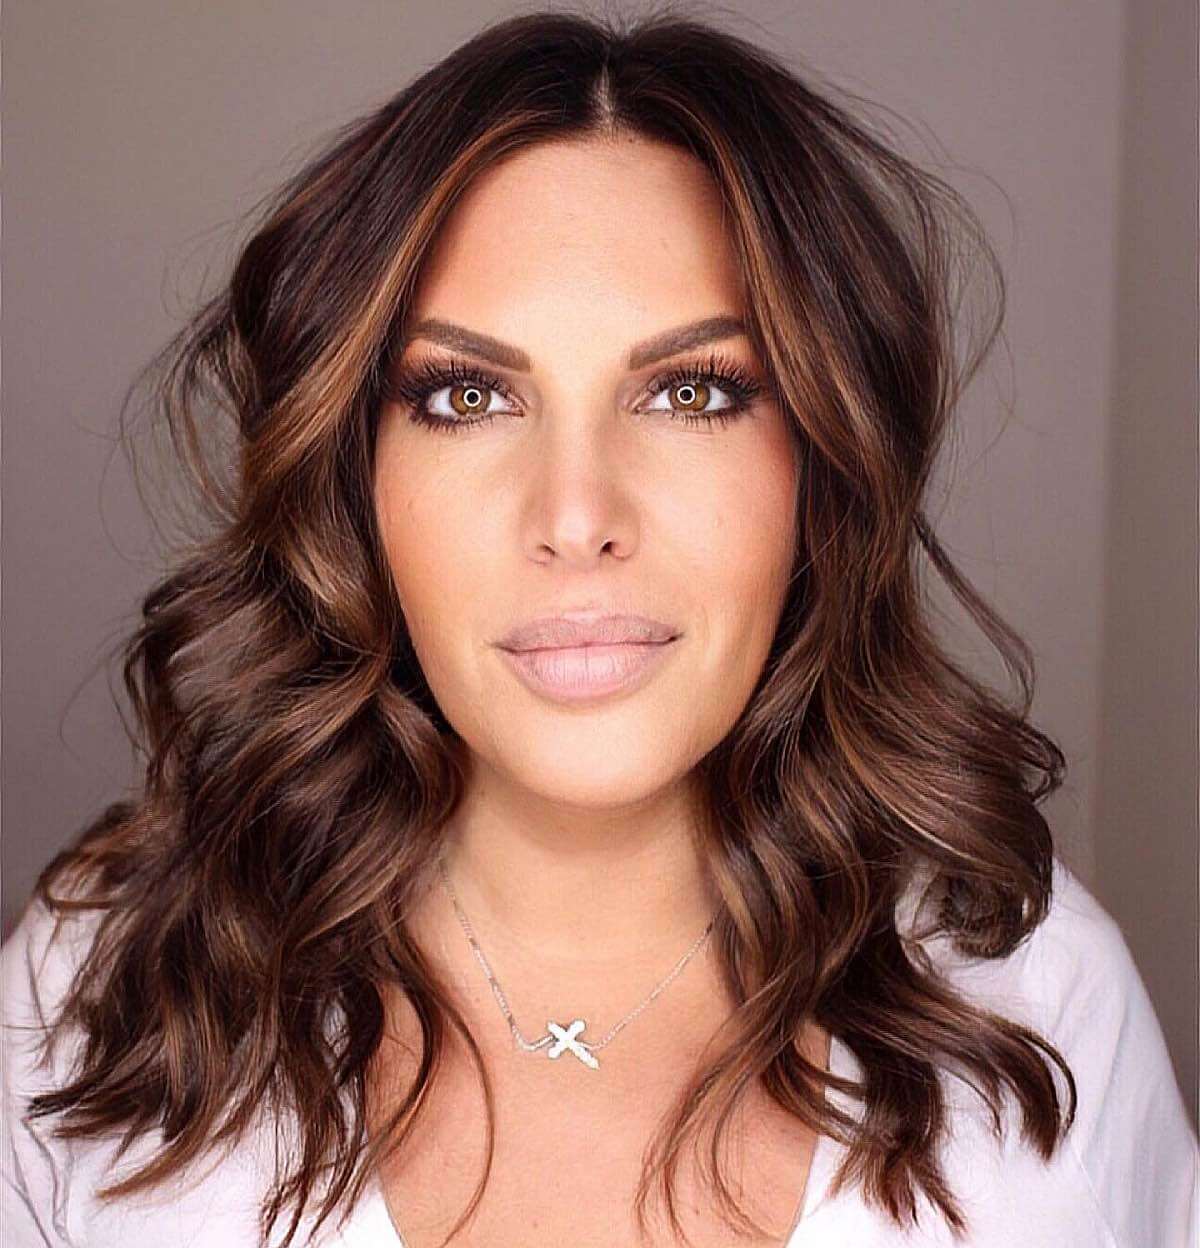 66 Stunning Brown Balayage Hair Color Ideas You Don&#039;t Want to Miss